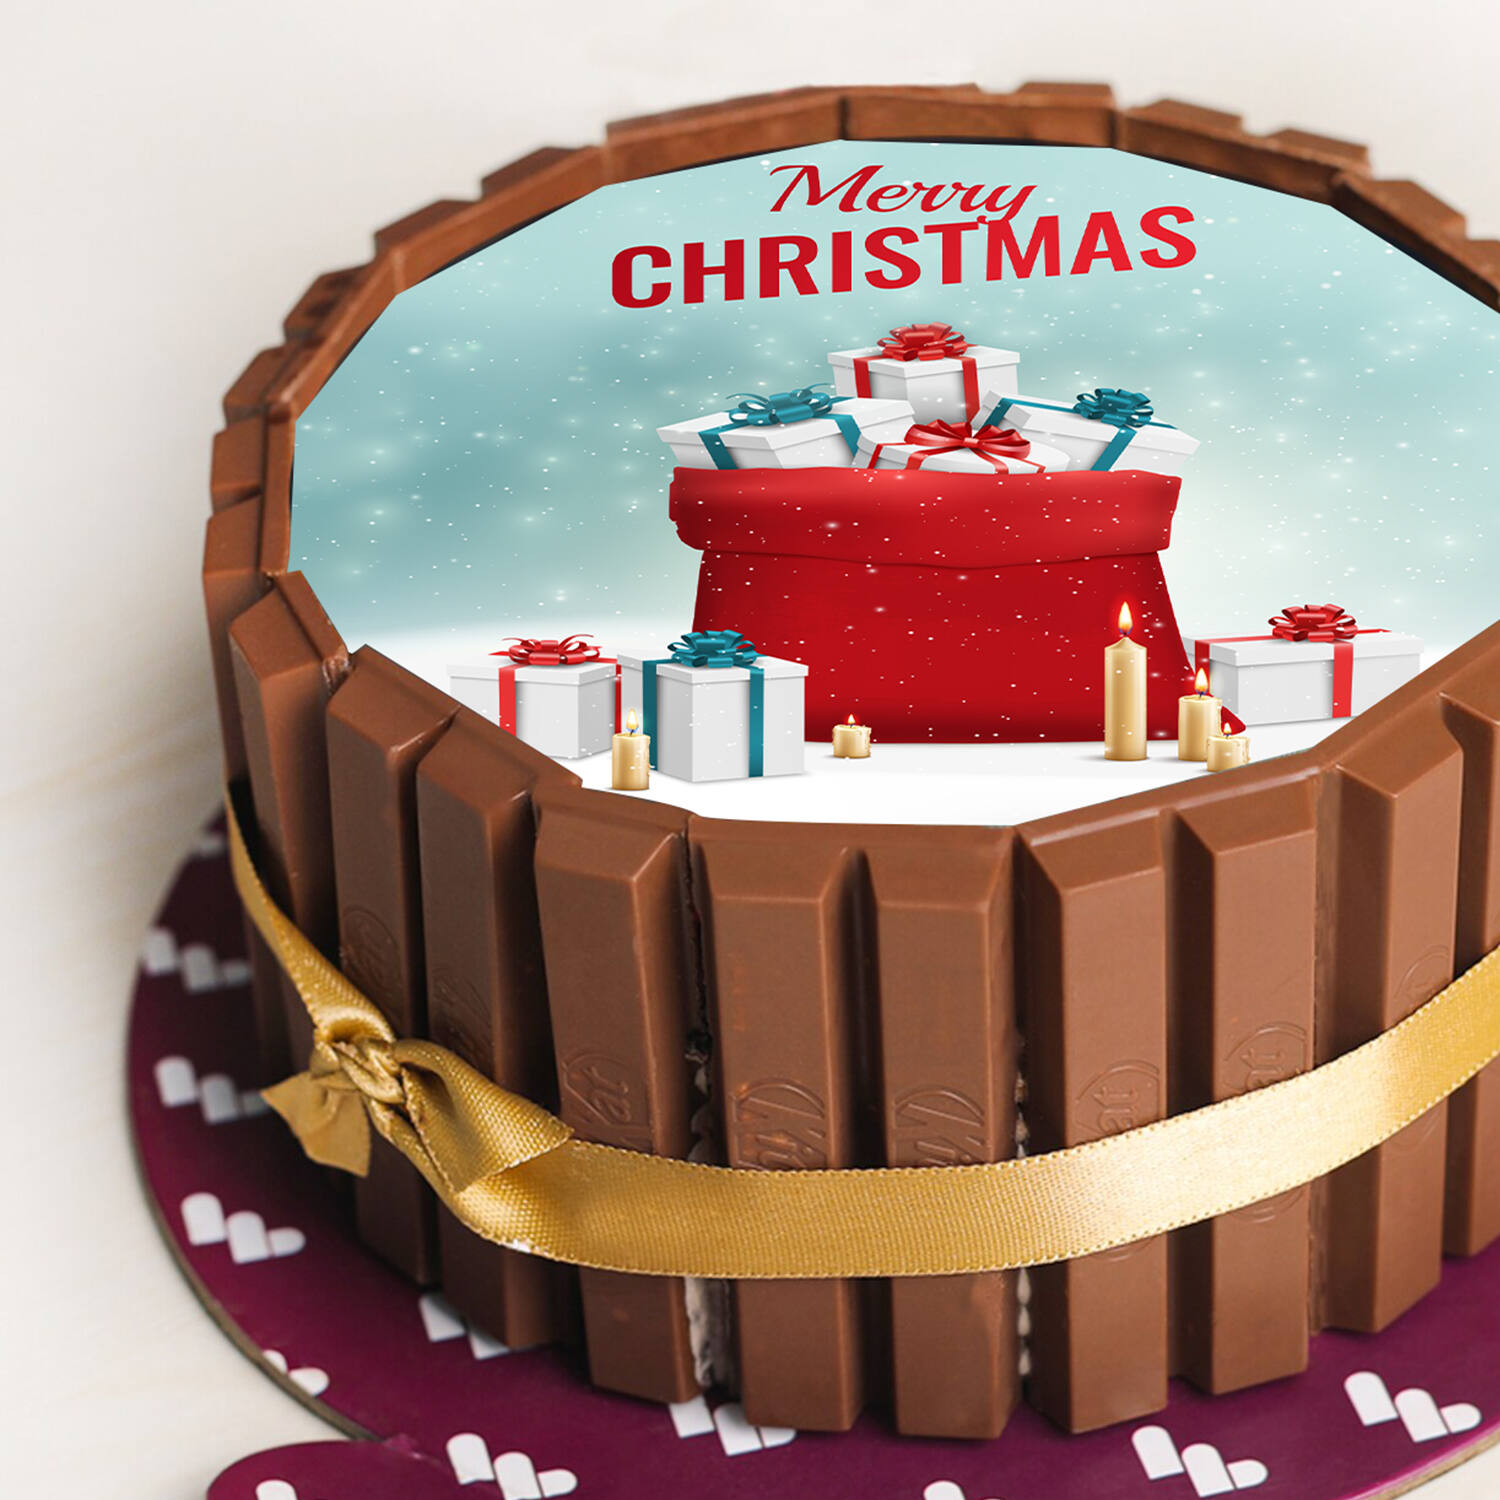 FOODSTUFF FINDS: Waitrose Christmas Cake Ingredients Box (By @cinabar)